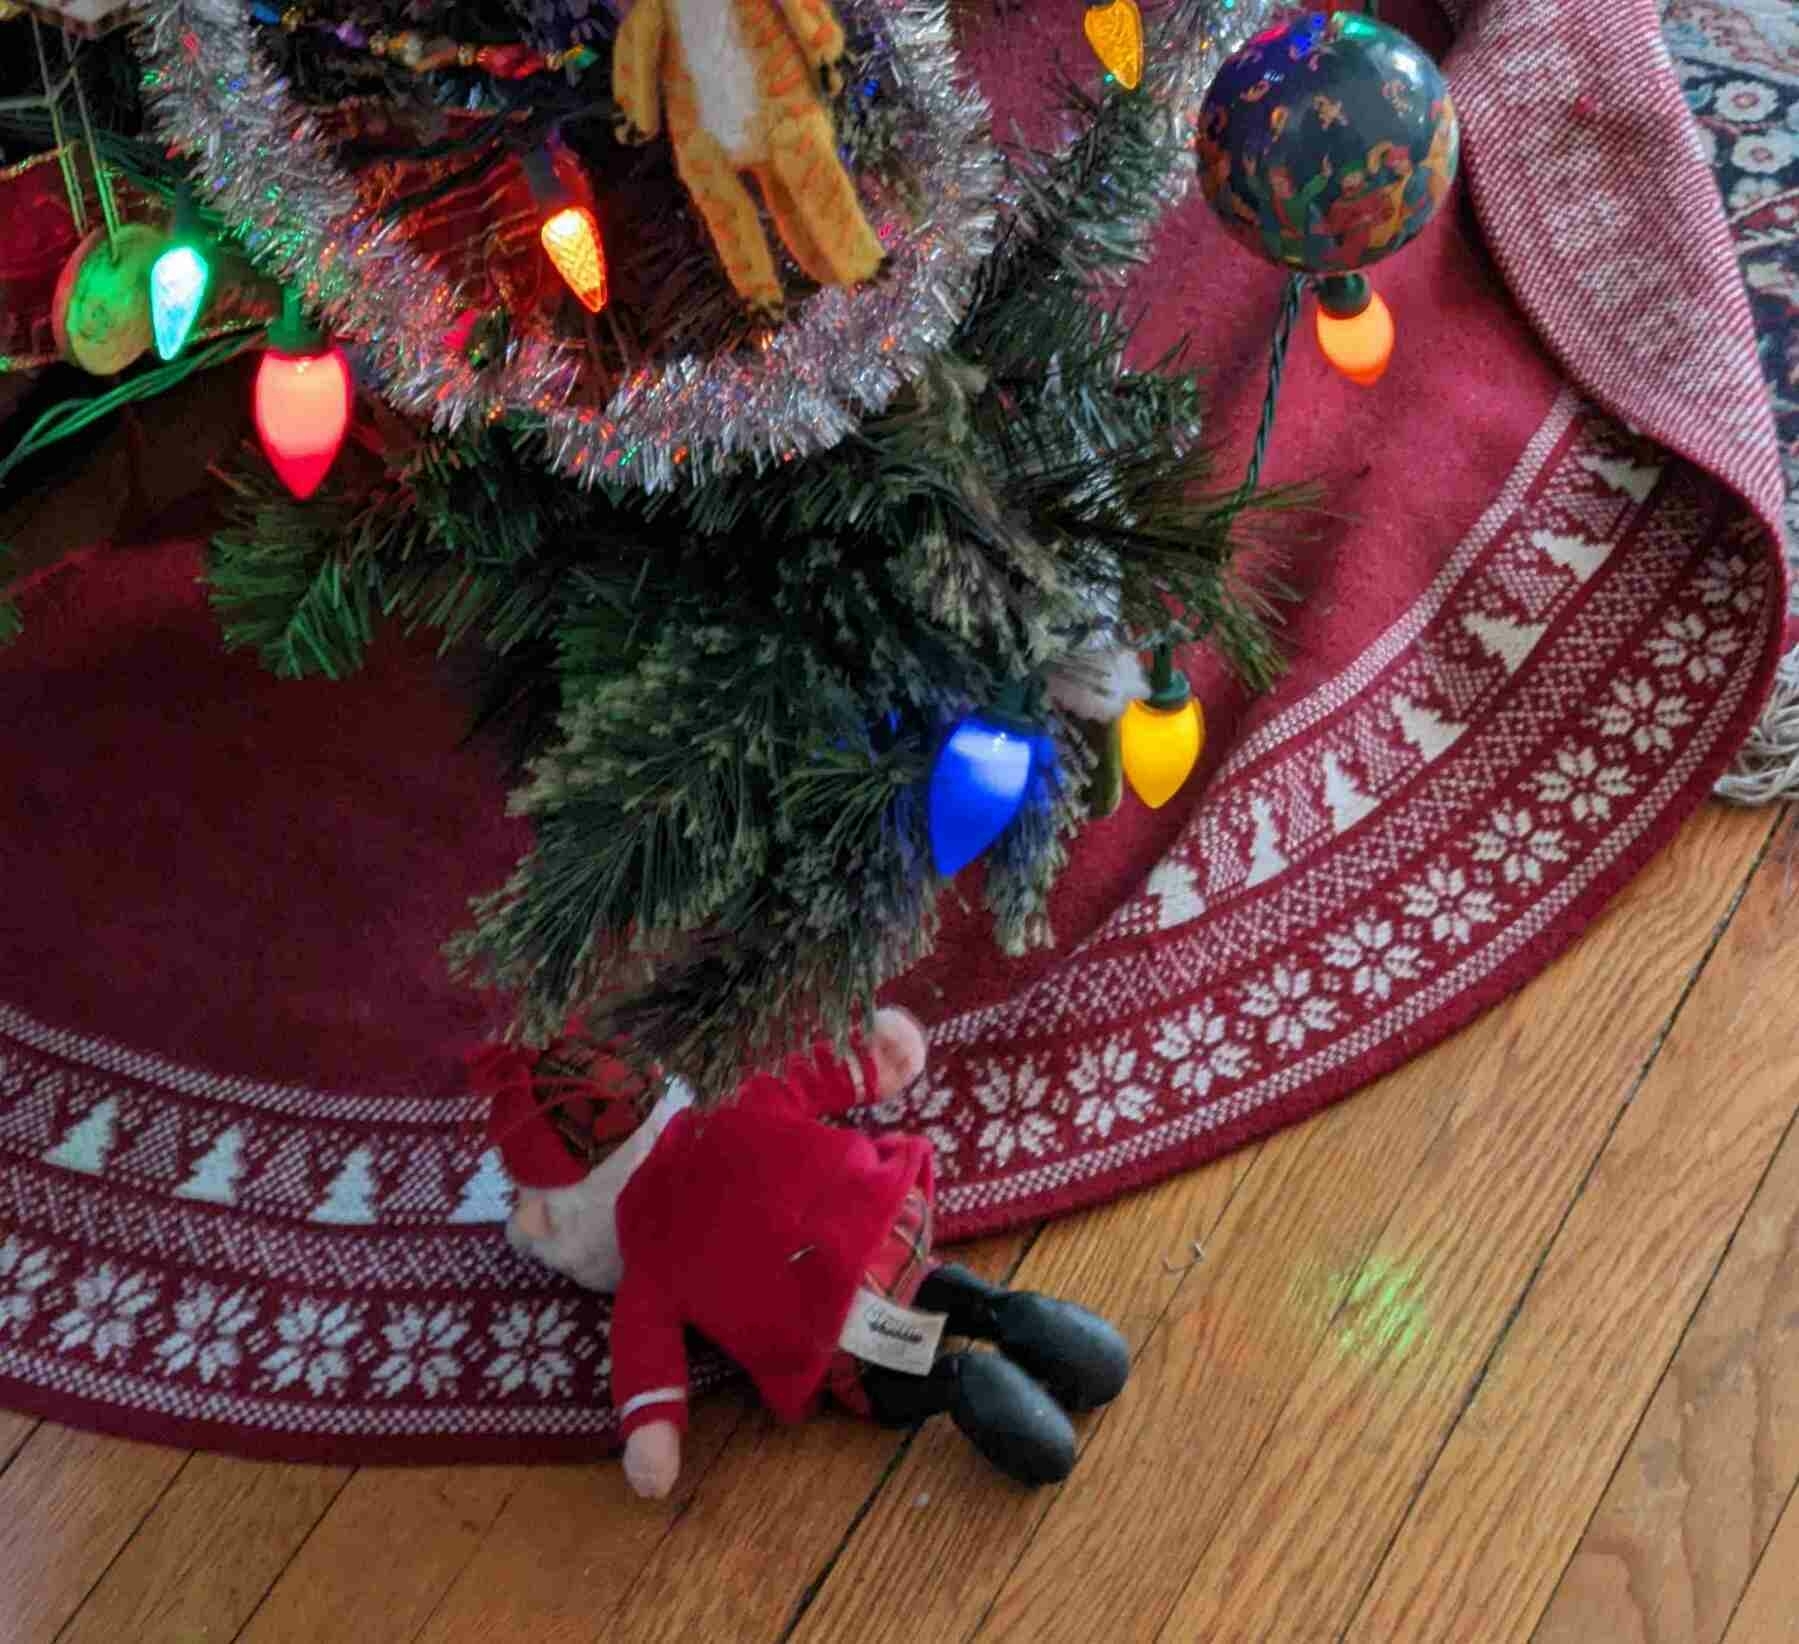 a Christmas tree ornament of Santa Claus is lying face-down on the floor, underneath a Christmas tree branch